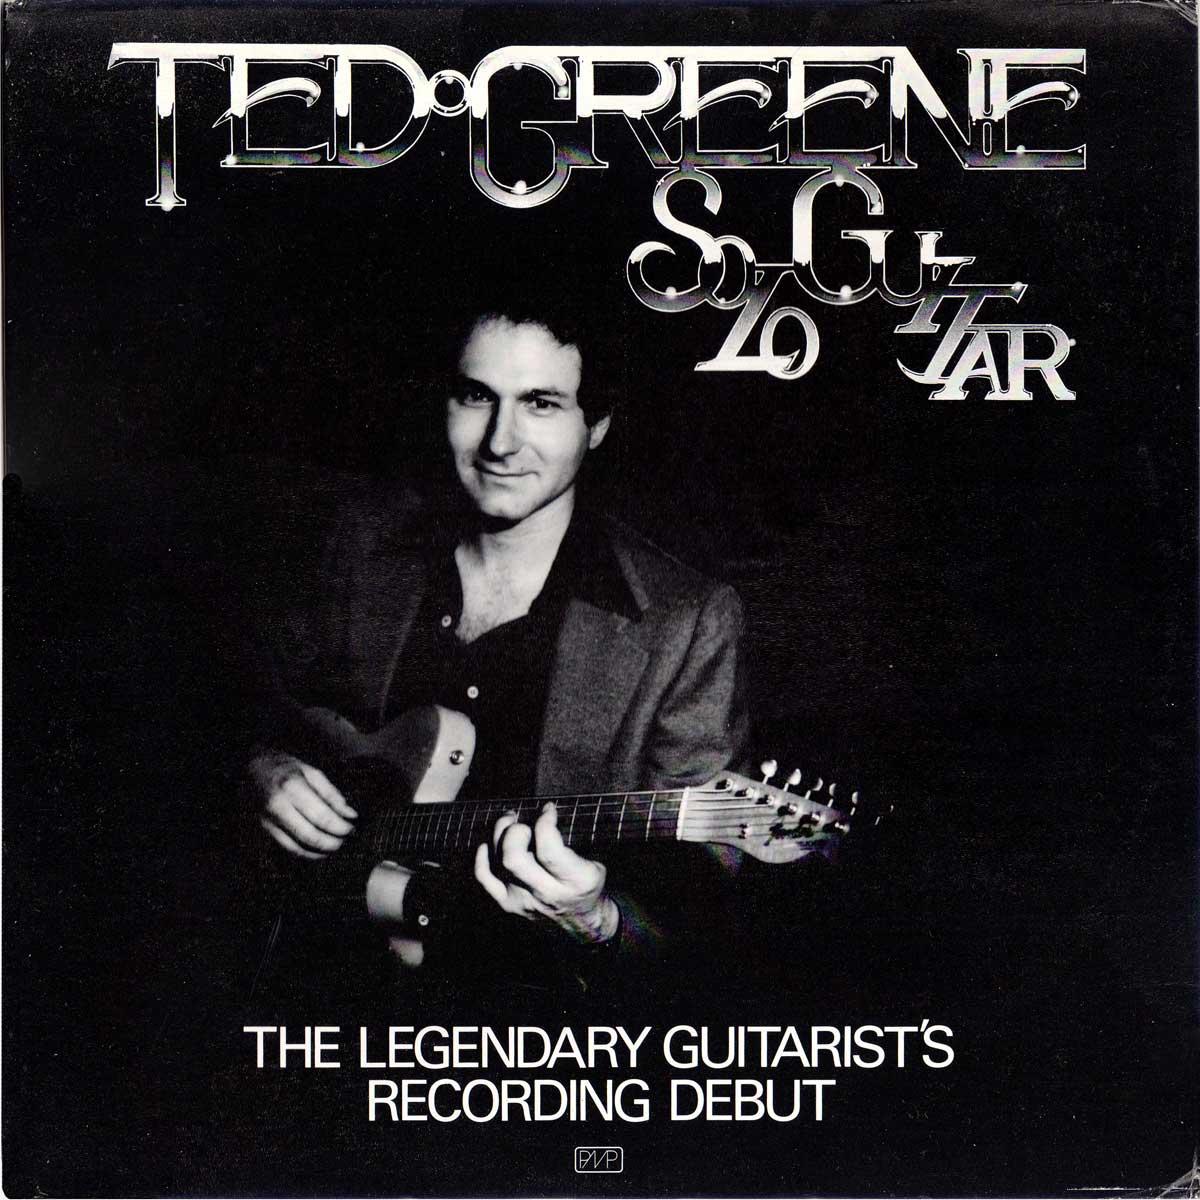 Ted Greene - Solo Guitar - Front cover